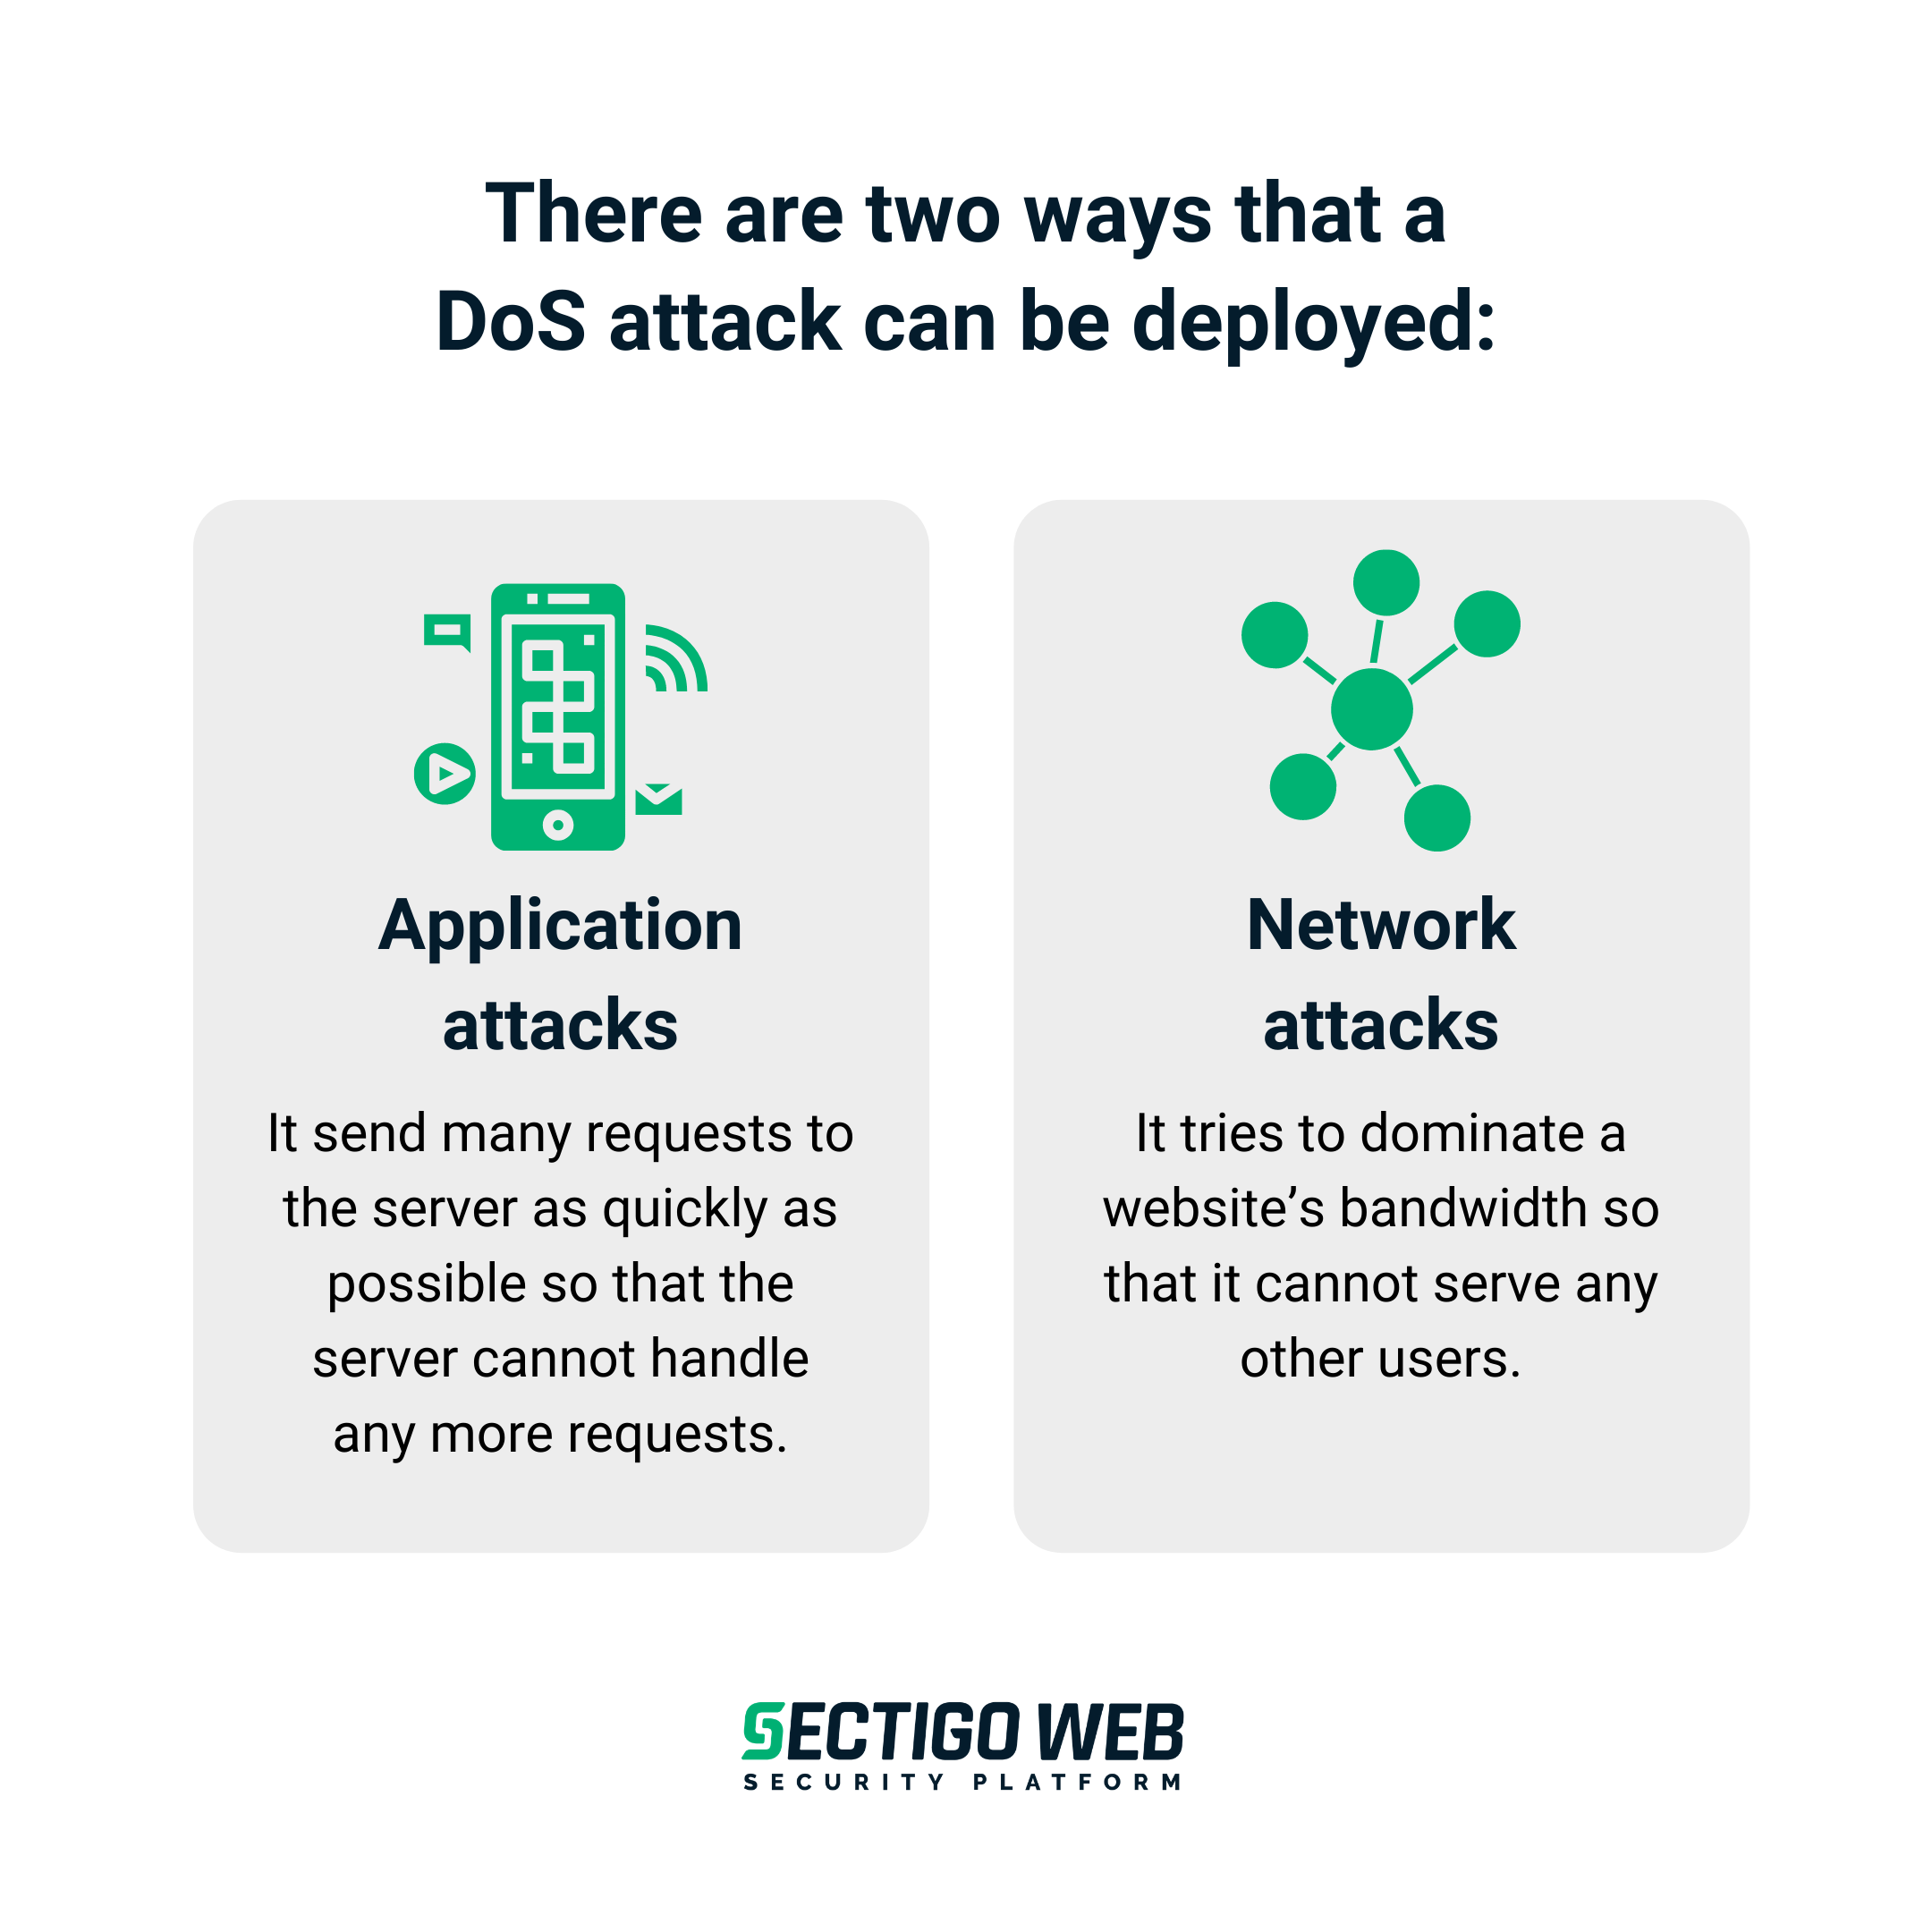 There are 2 ways that a DoS attack can be deployed.